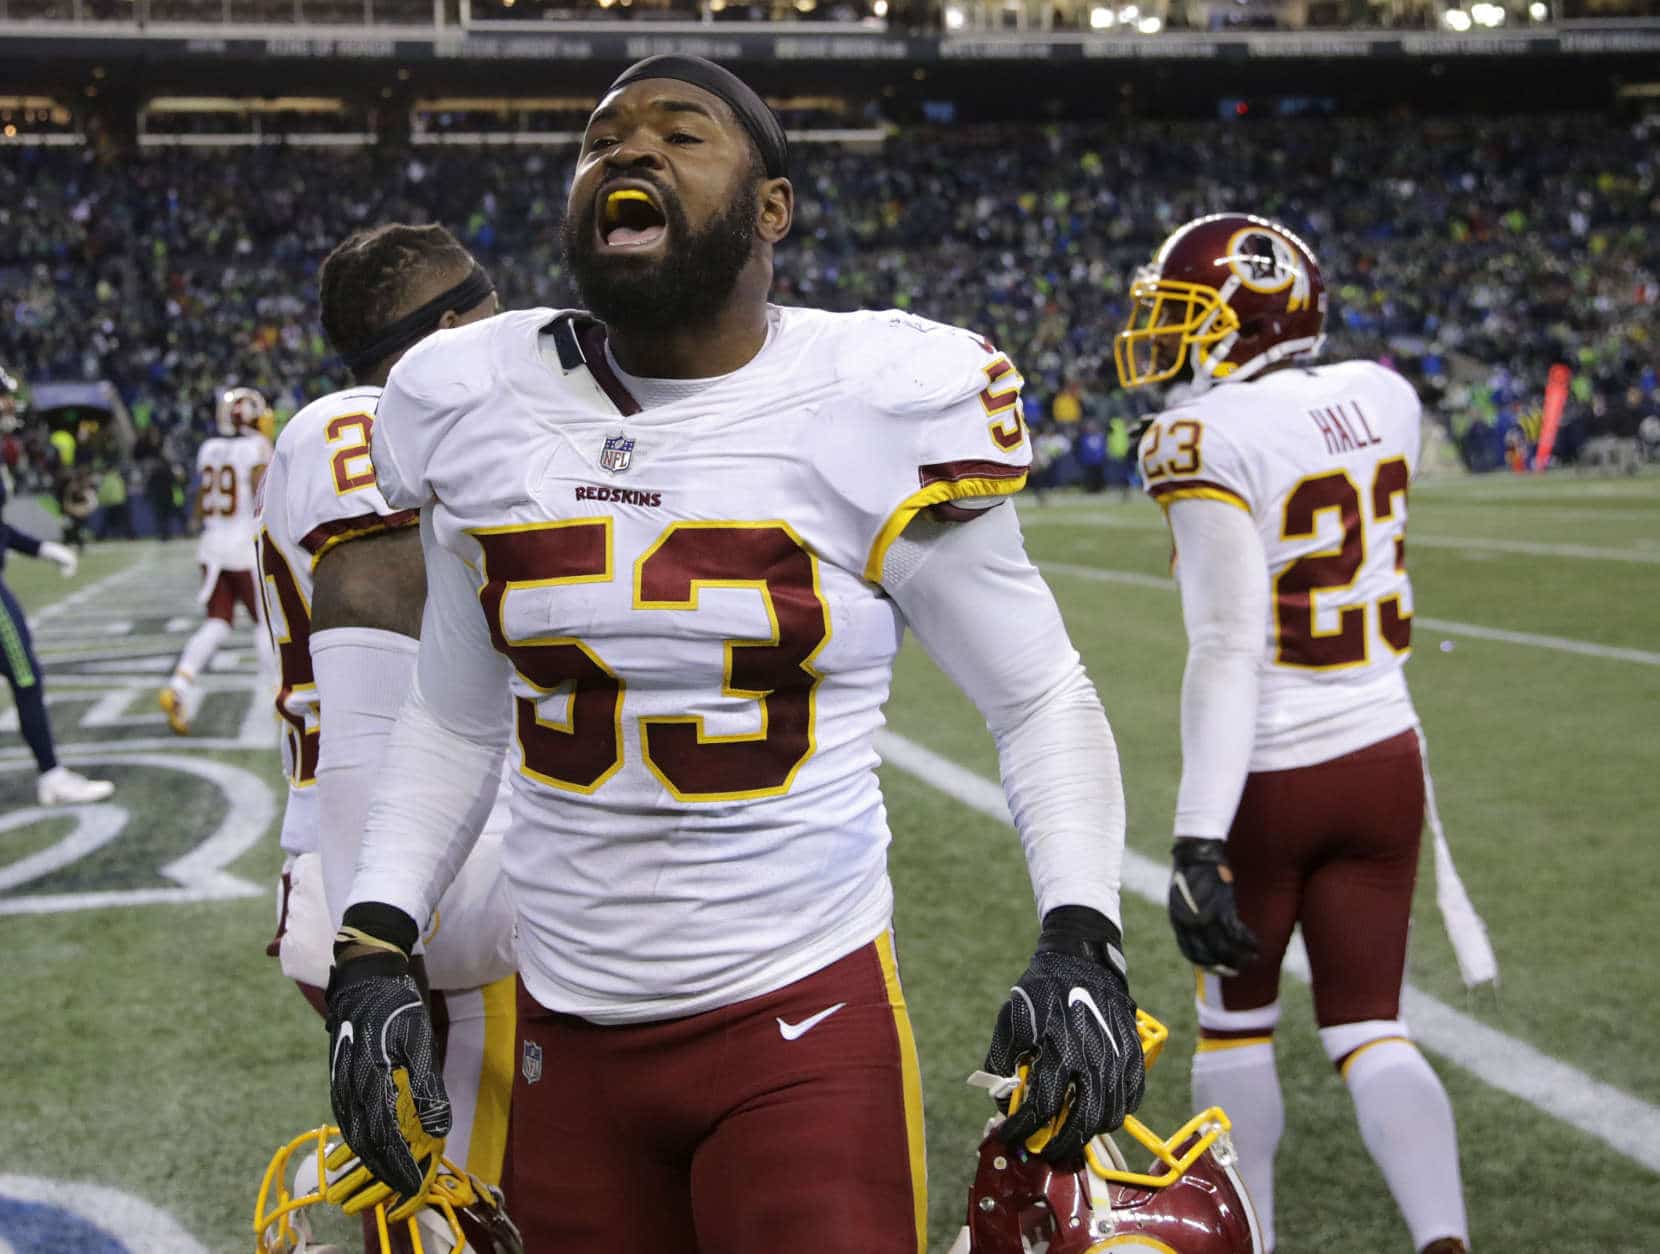 Washington Redskins inside linebacker Zach Brown celebrates a play in the second half of an NFL football game against the Seattle Seahawks, Sunday, Nov. 5, 2017, in Seattle. (AP Photo/Stephen Brashear)